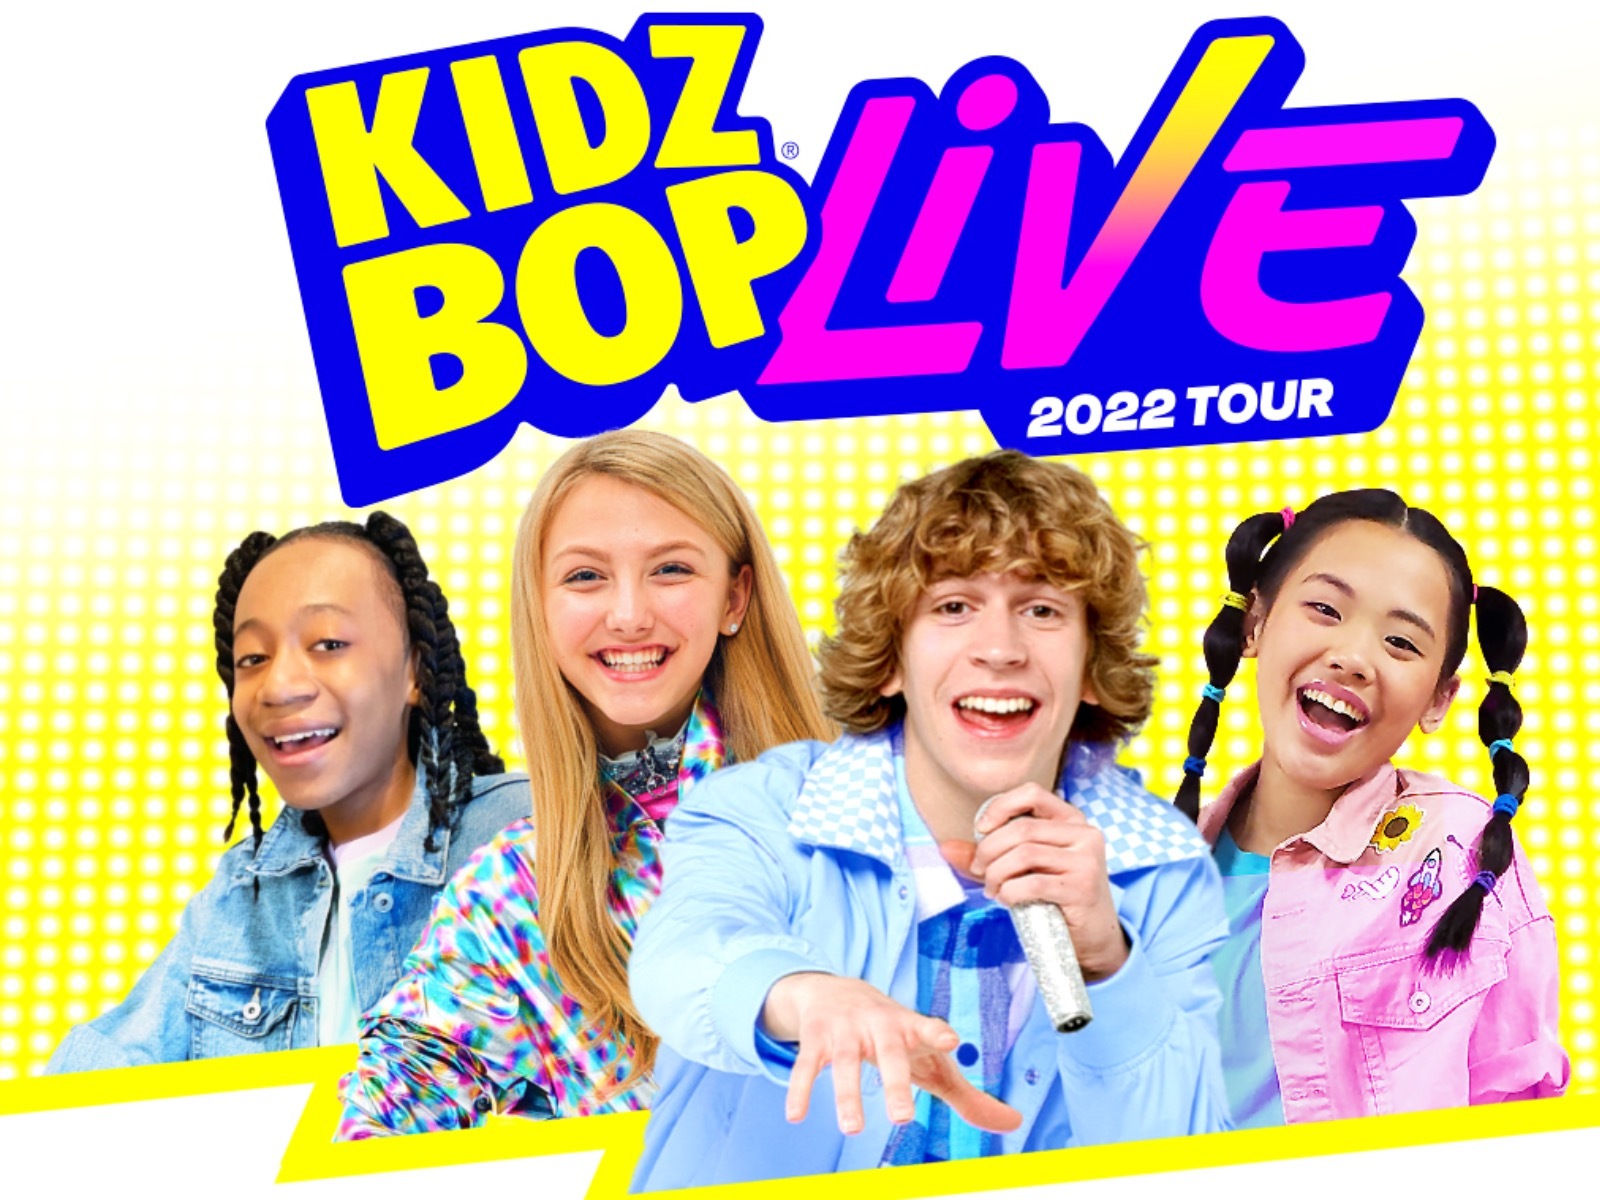 Wisconsin State Fair brings Kidz Bop to the main stage